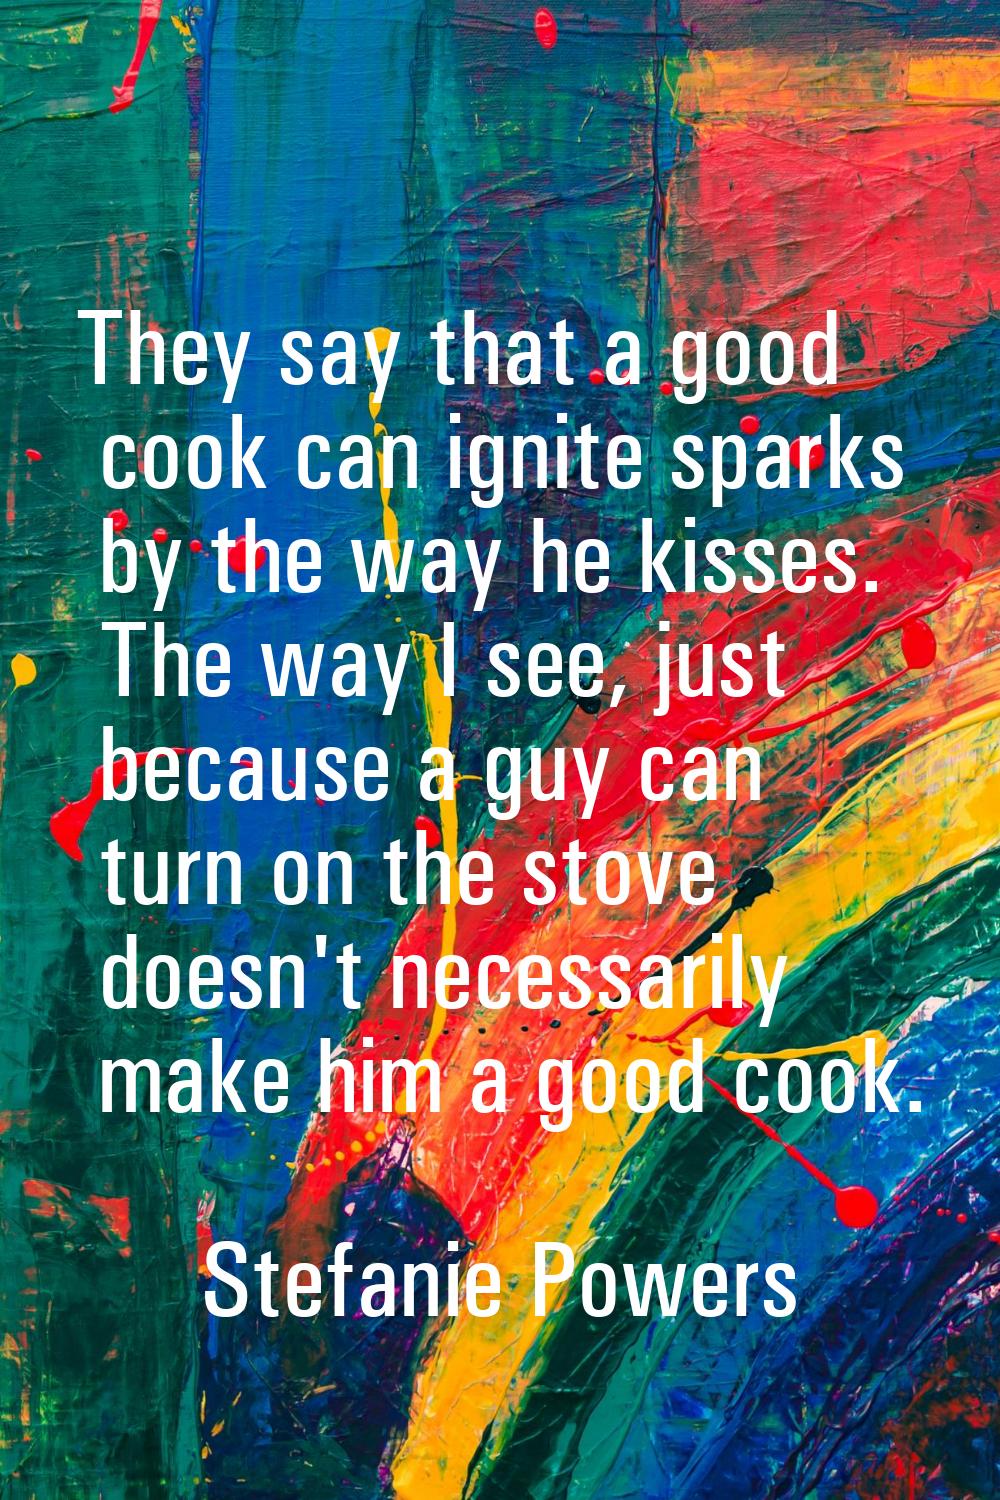 They say that a good cook can ignite sparks by the way he kisses. The way I see, just because a guy